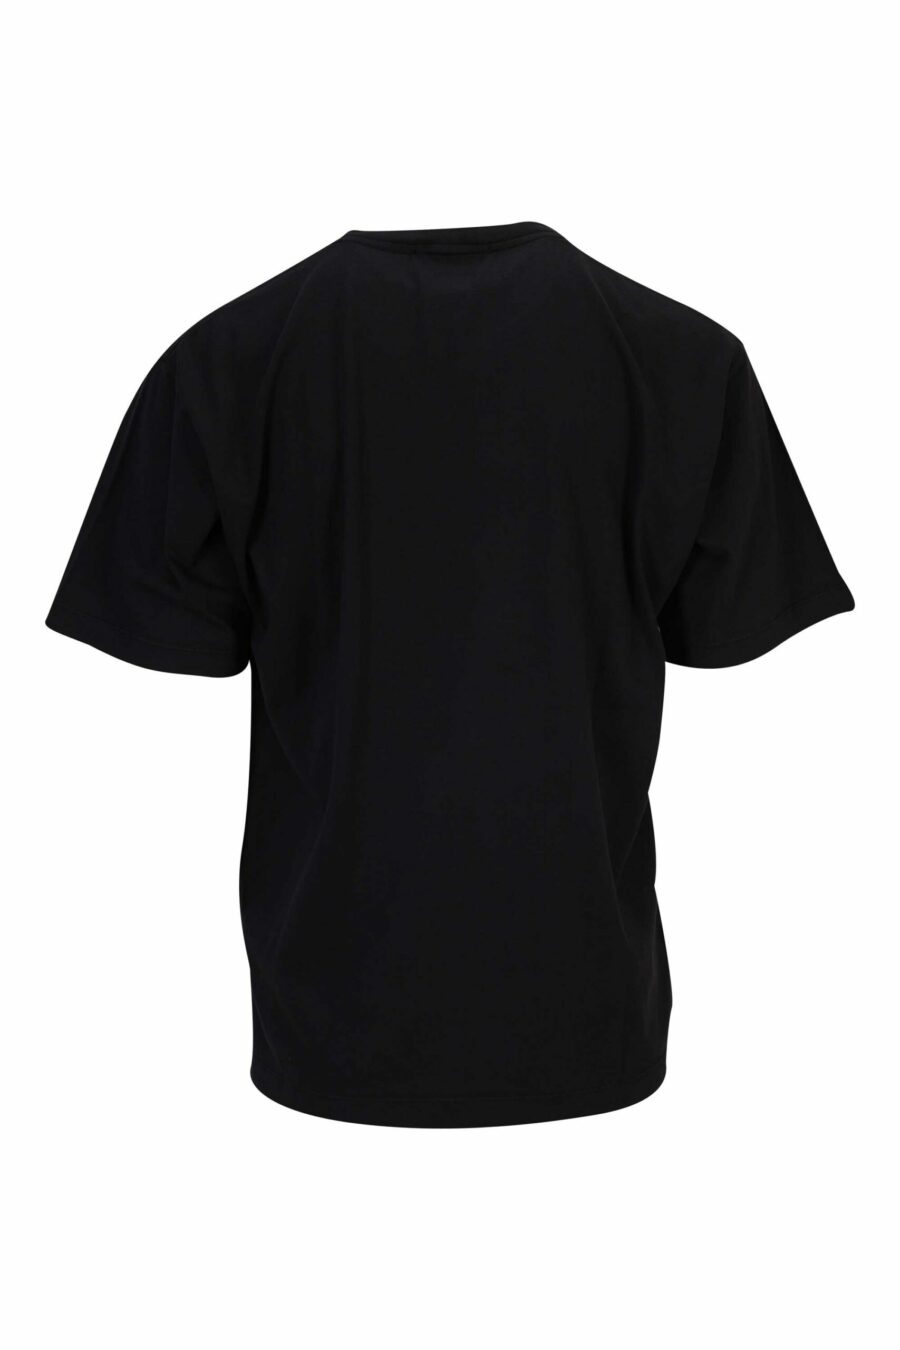 Black T-shirt with compass maxilogo - 8052572907272 1 scaled